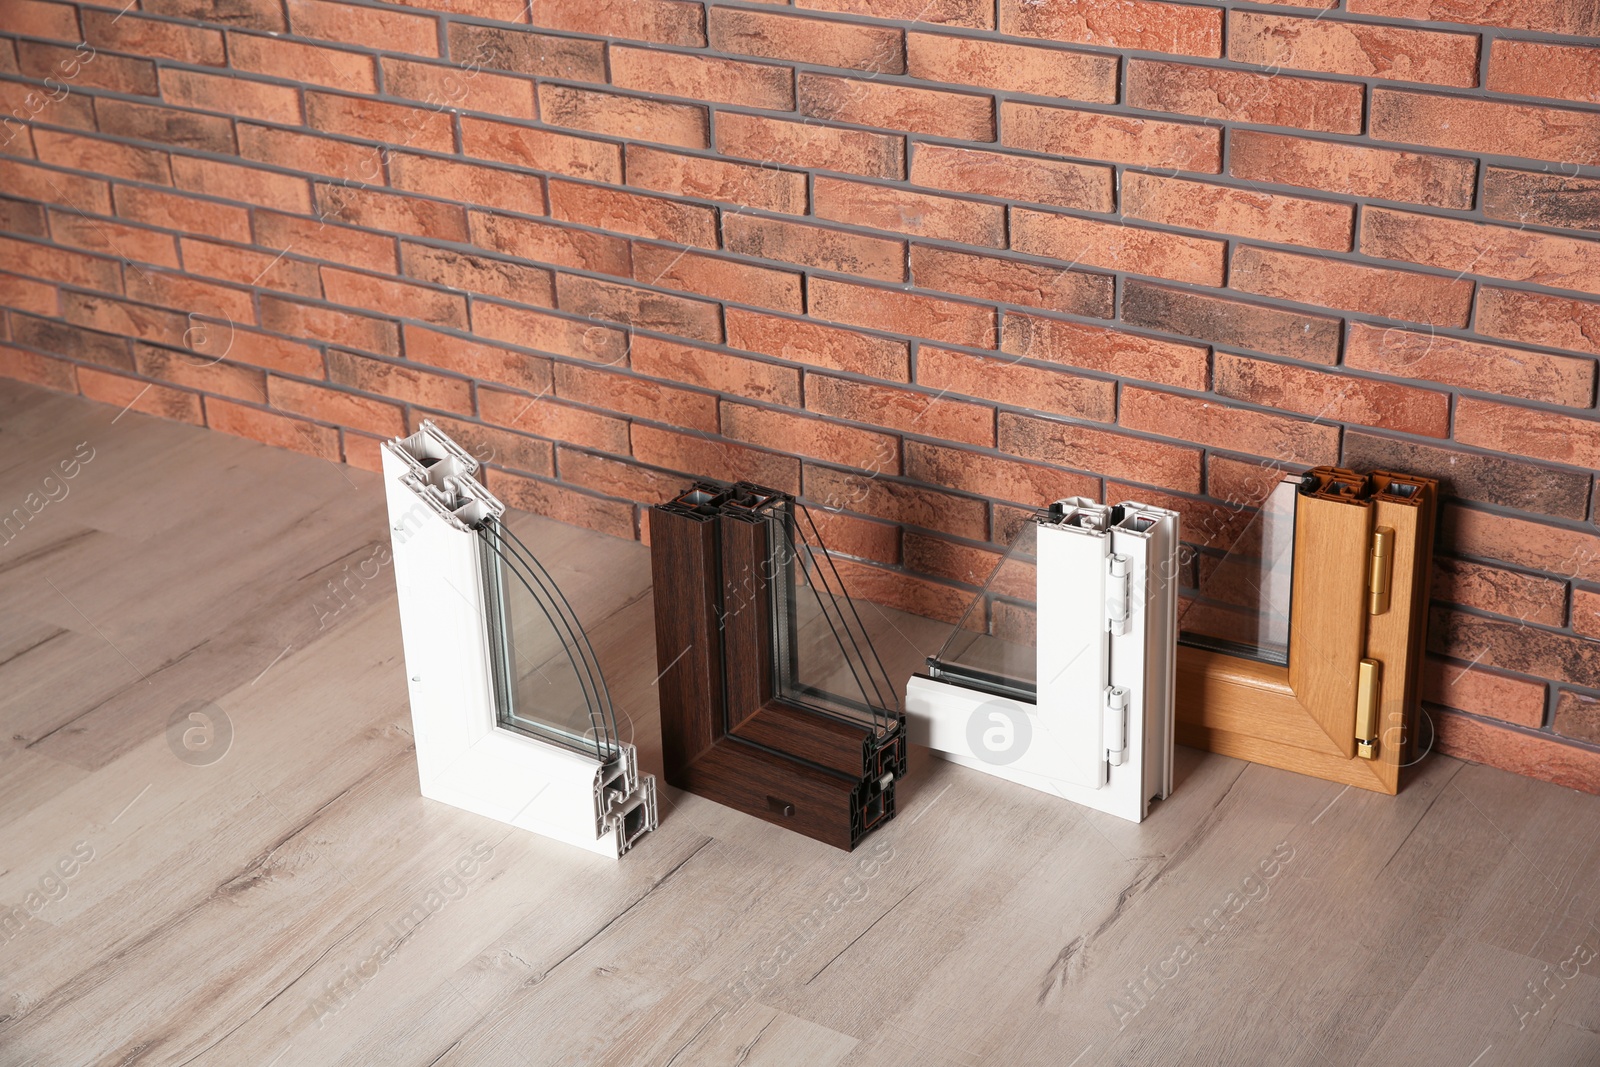 Photo of Samples of modern window profiles on floor against brick wall. Installation service